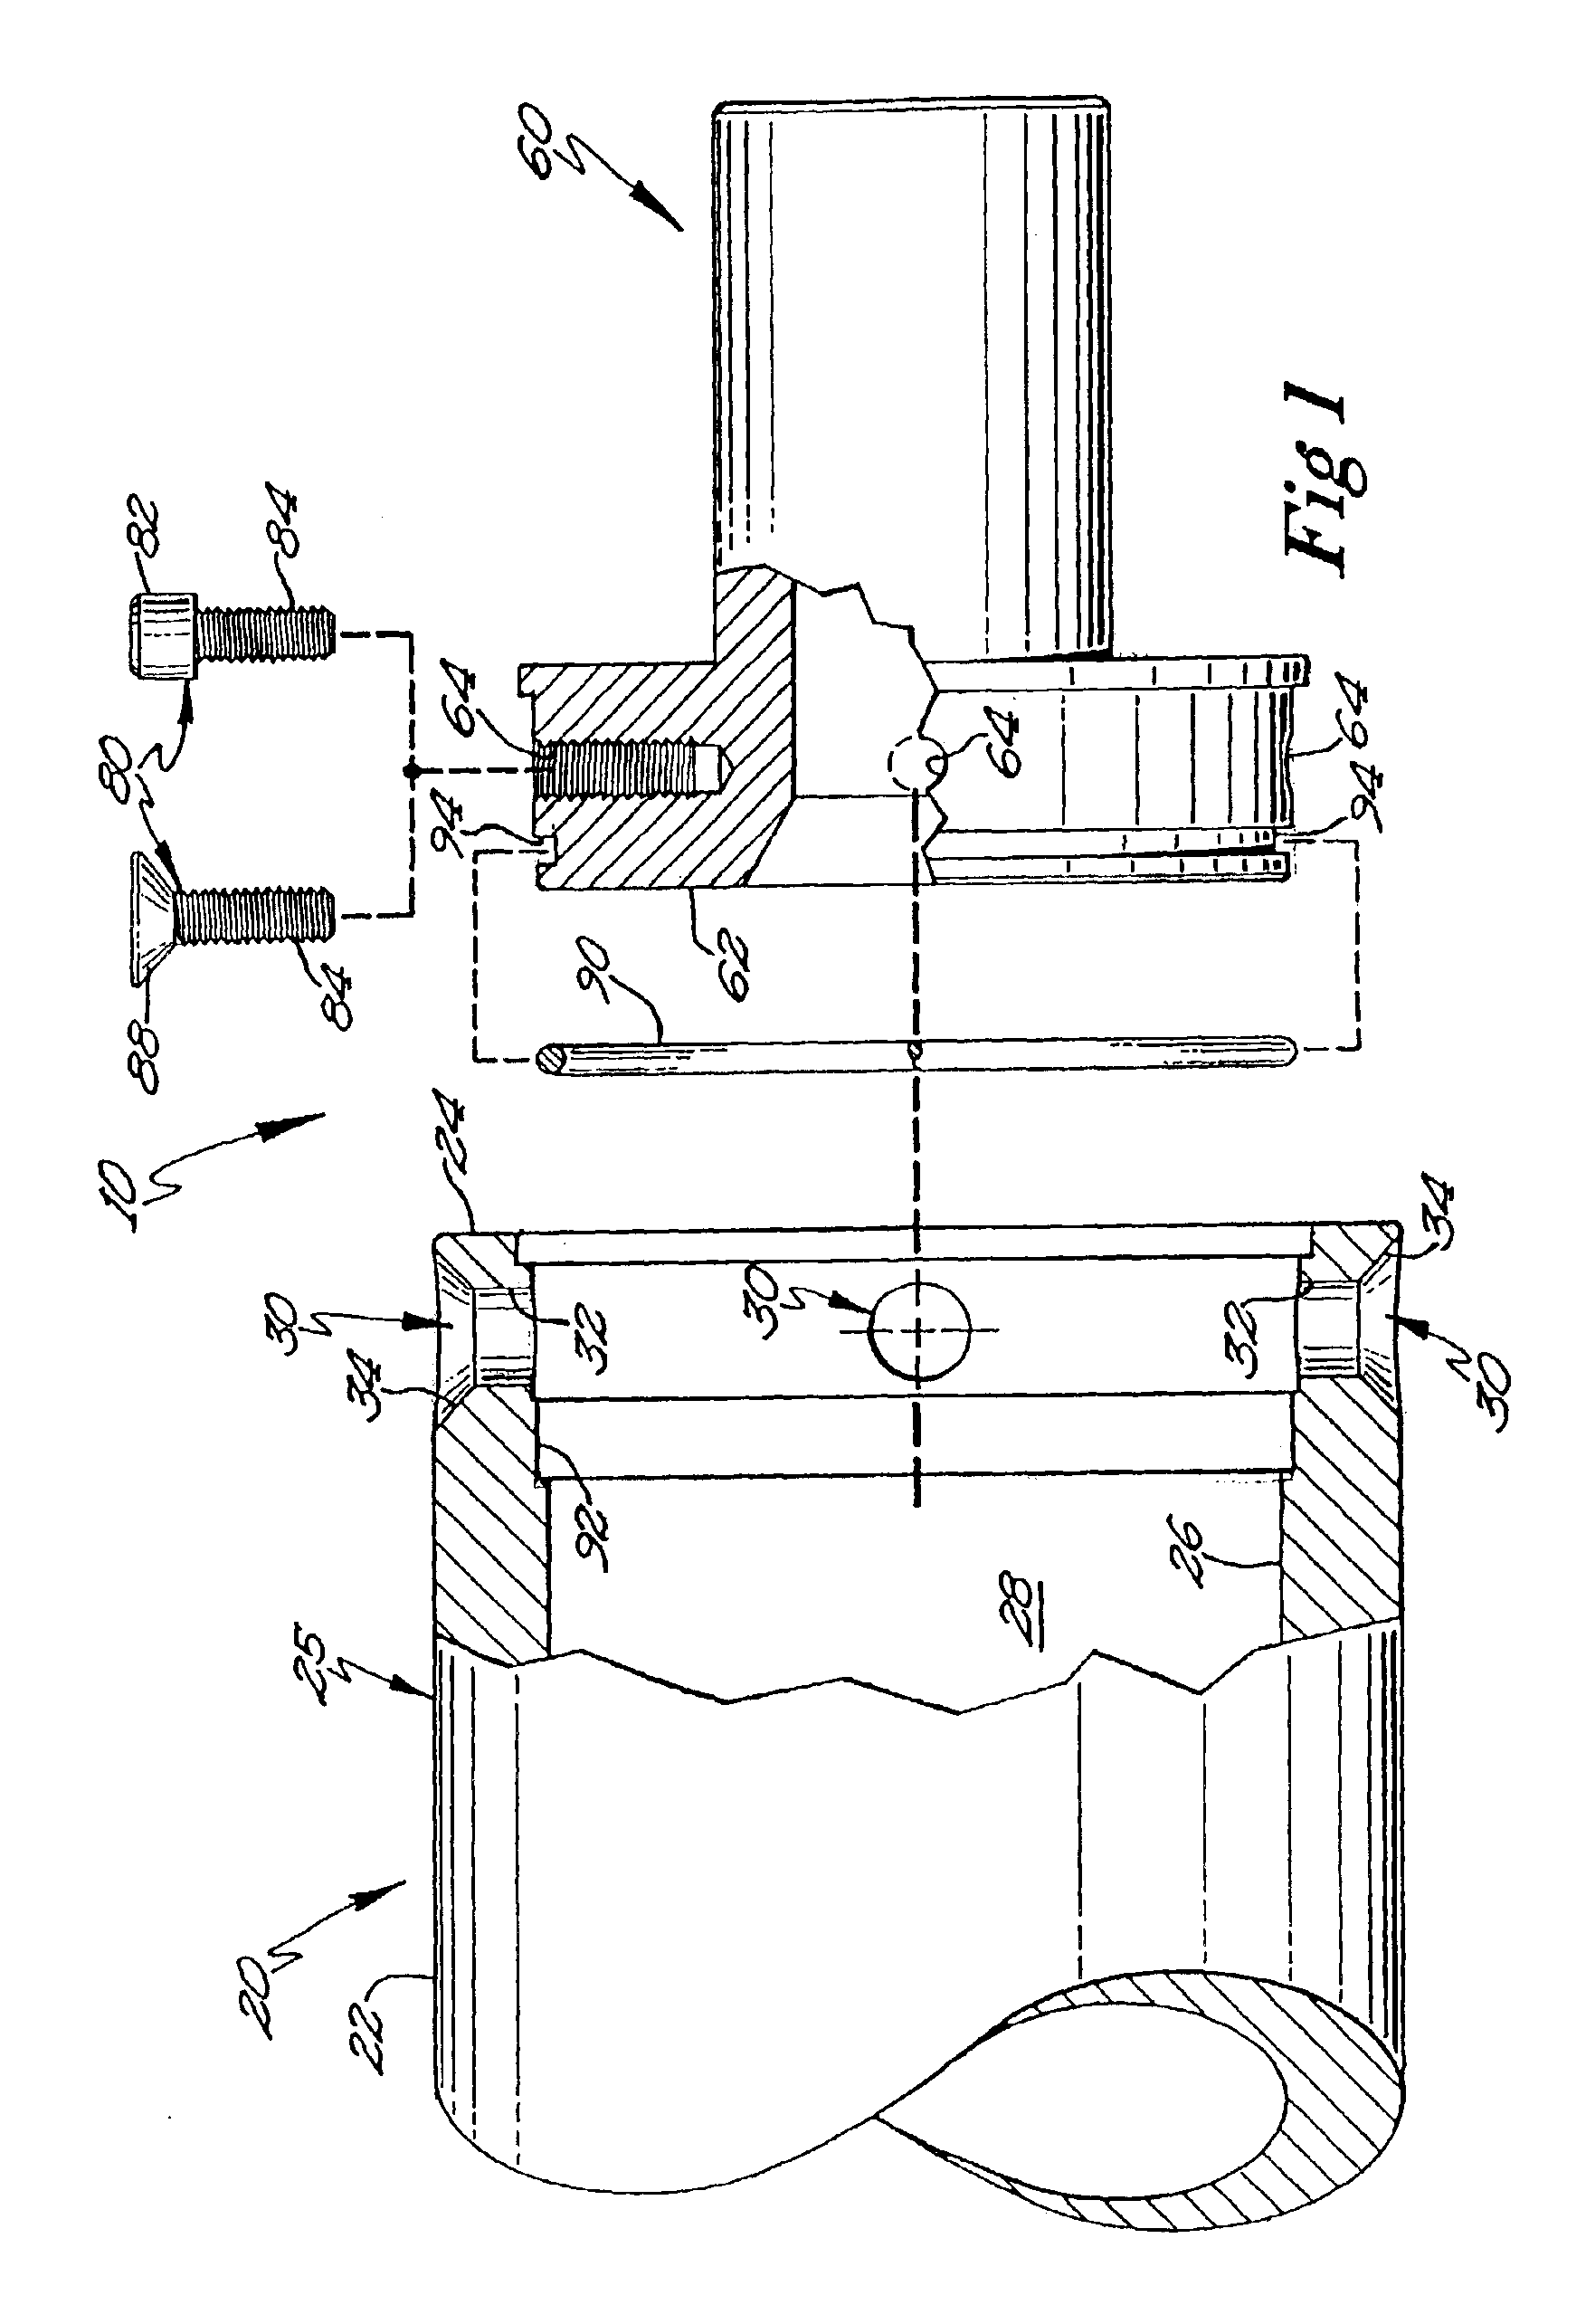 Cylindrical magnetron target and spindle apparatus